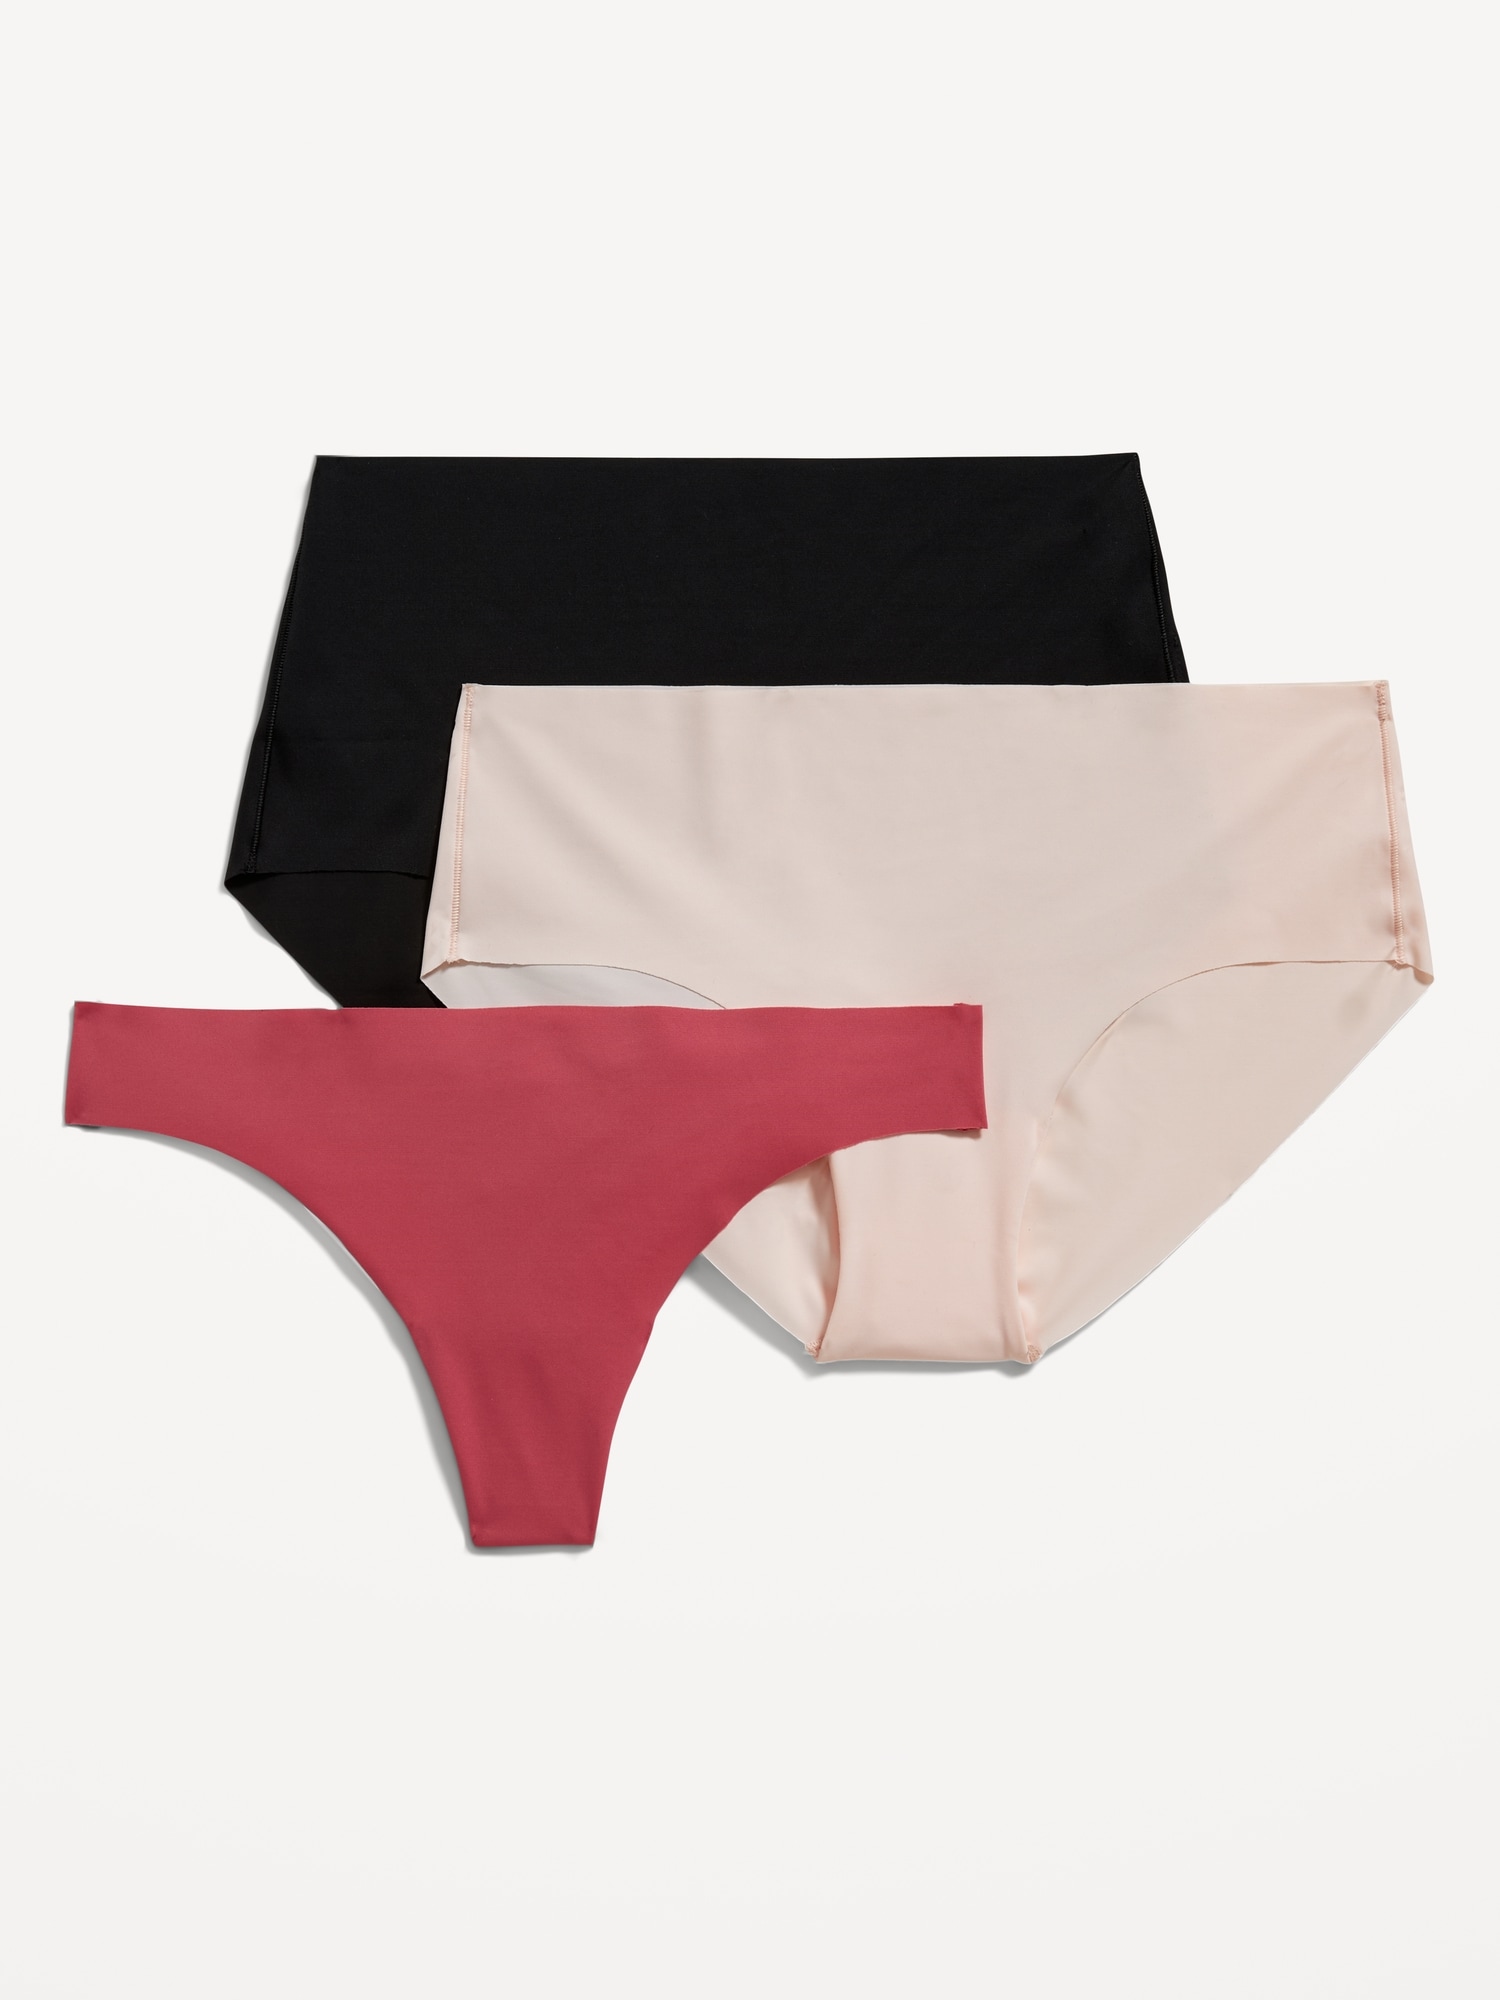 Old Navy Soft-Knit No-Show Underwear Variety 3-Pack for Women multi. 1